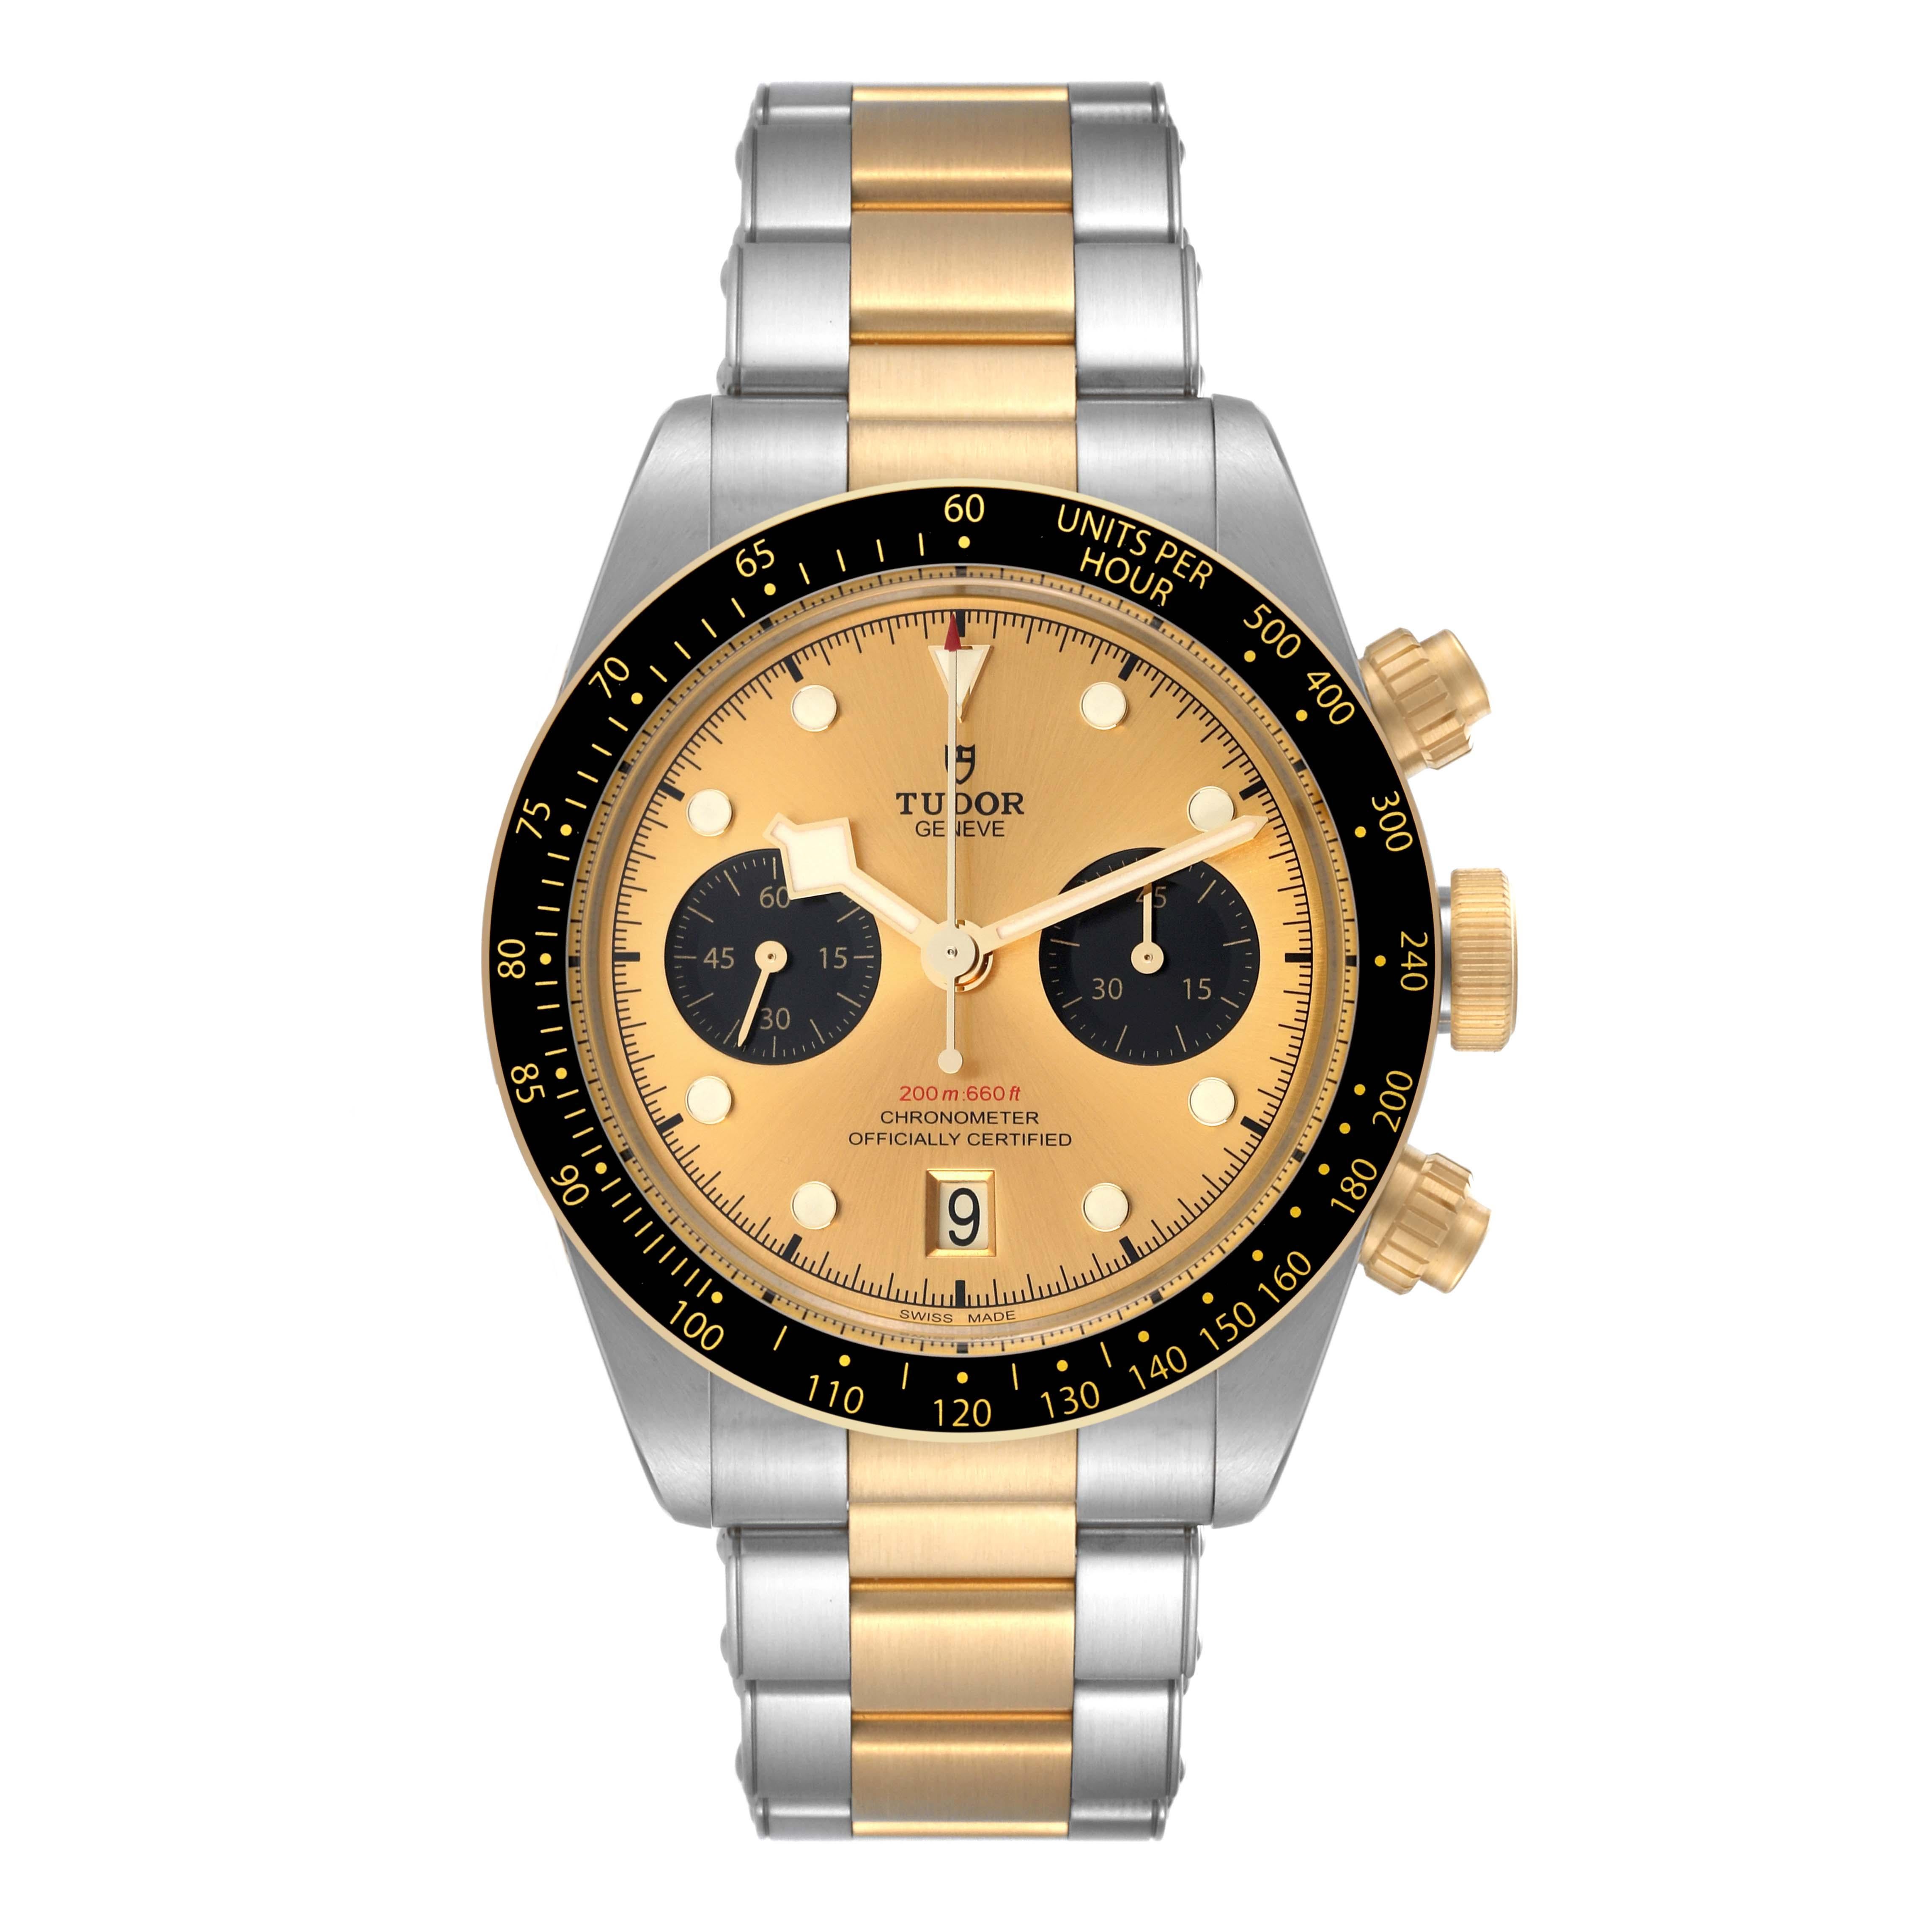 Tudor Heritage Black Bay Steel Yellow Gold Mens Watch 79363 Box Card. Automatic self-winding movement. Stainless steel and 18K yellow gold oyster case 41 mm in diameter. Tudor logo on a crown. 18k yellow gold bezel with a black anodised aluminium